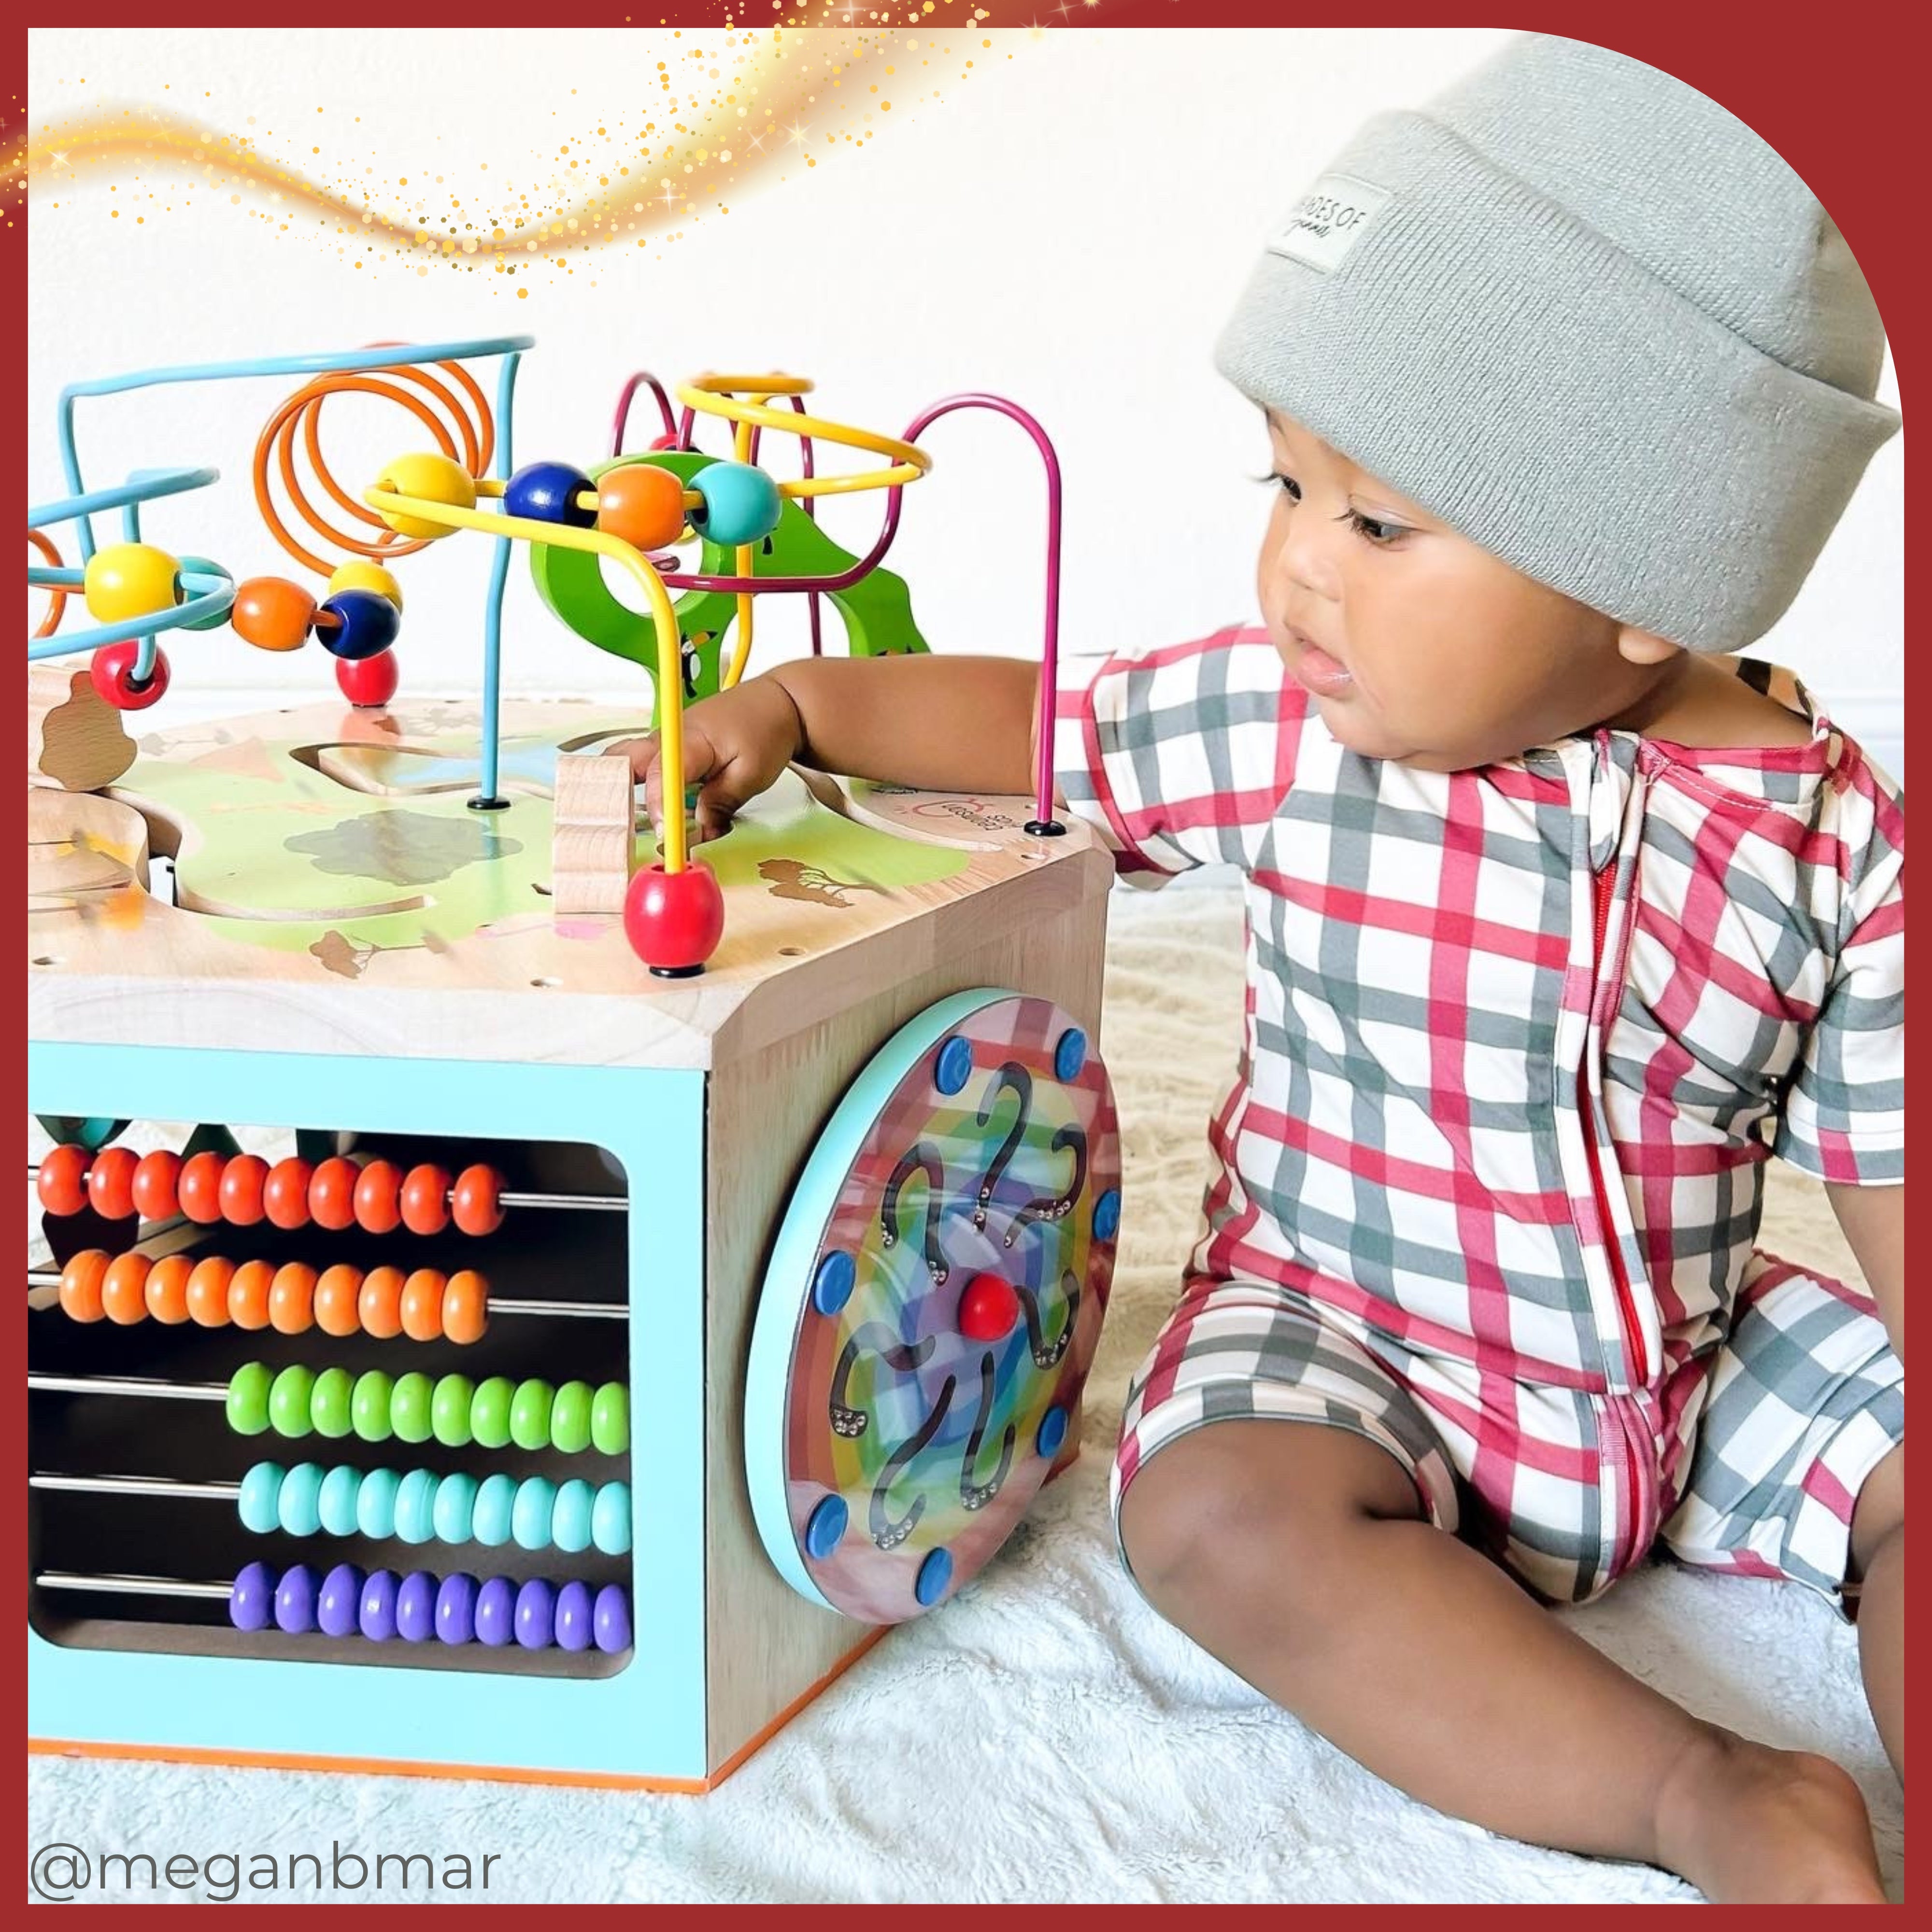 a baby boy plays intently at his busy wooden activity set